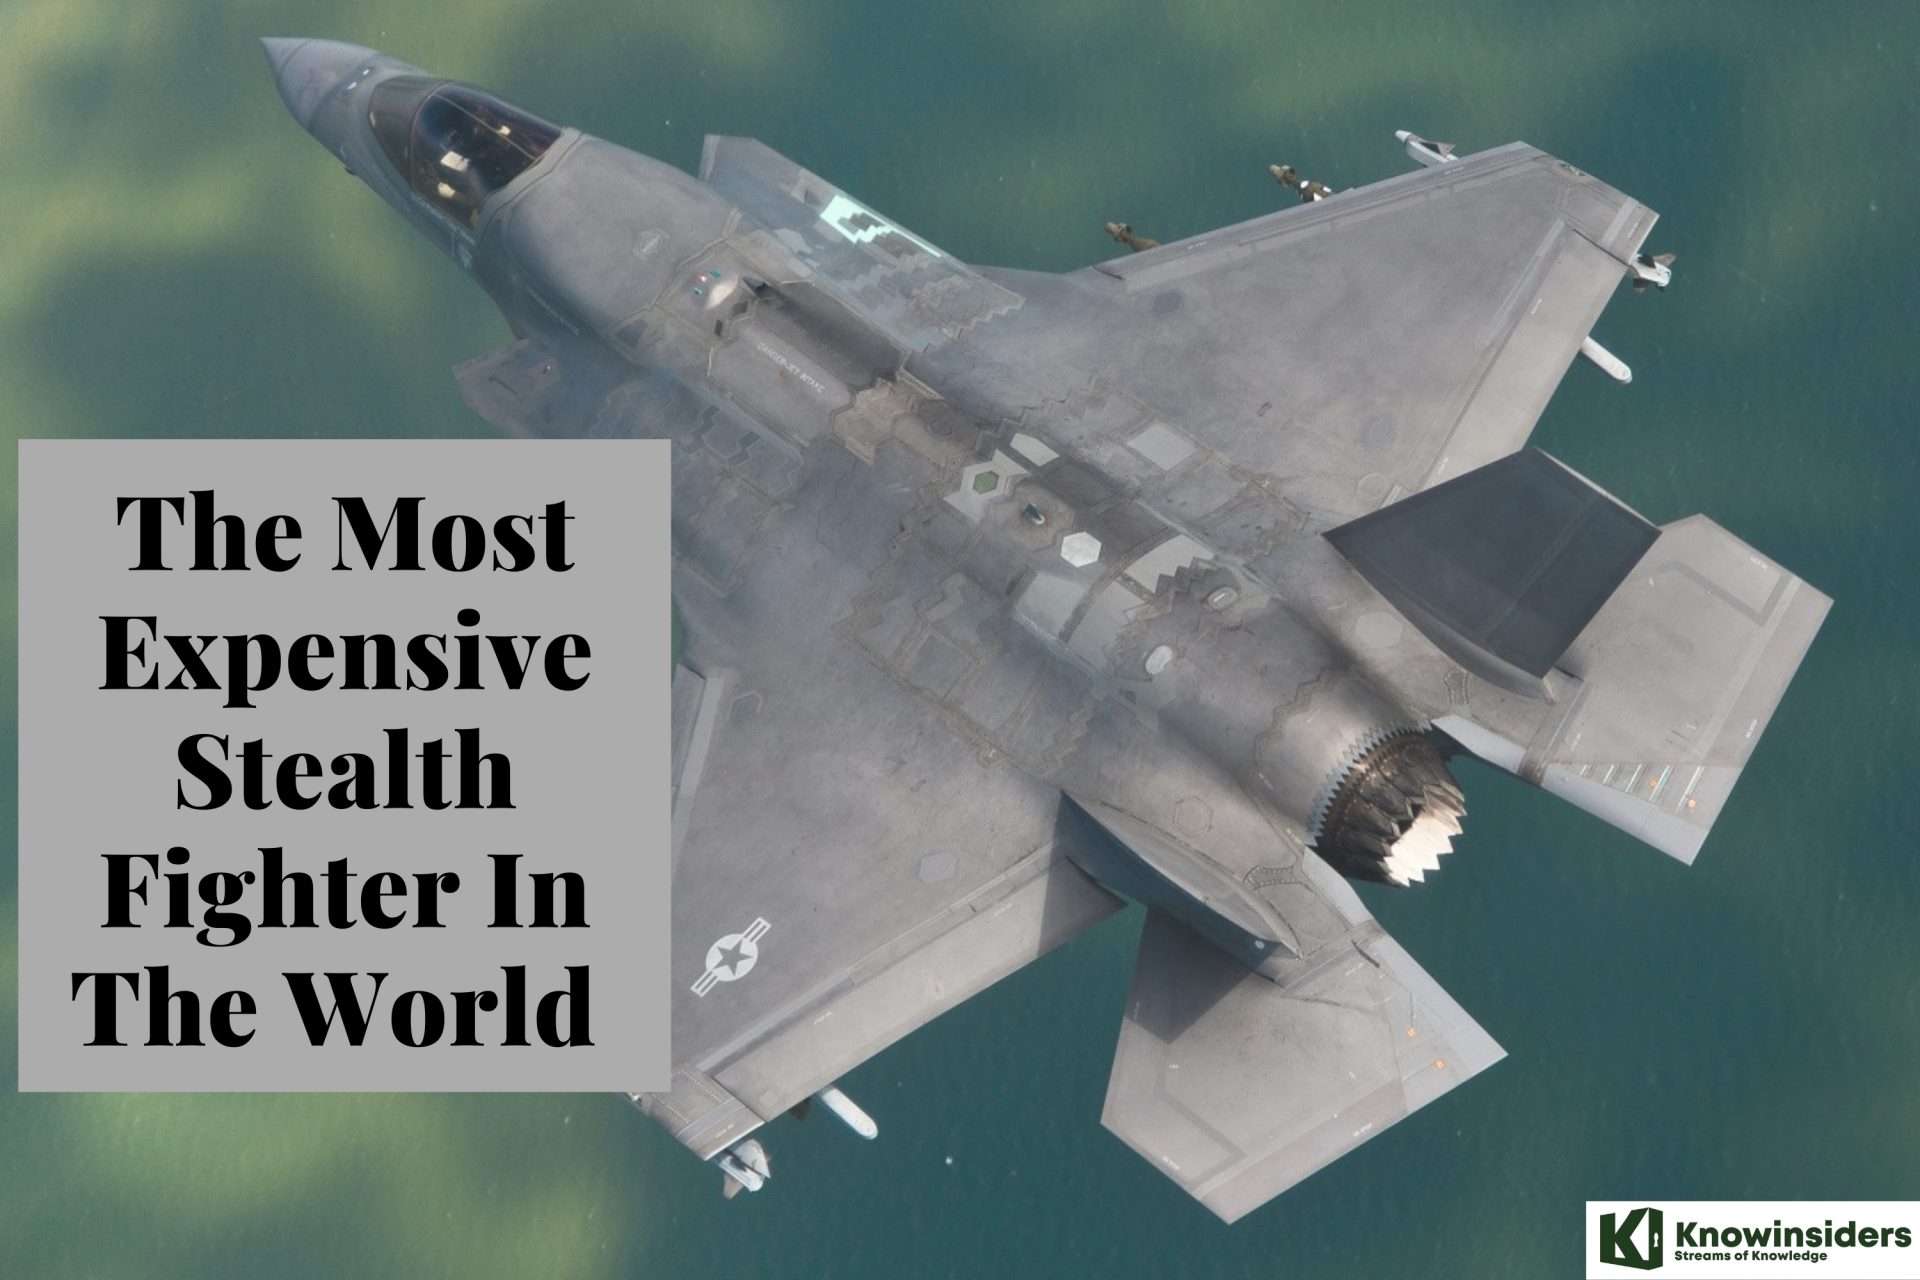 Facts About the U.S 6th-Generation Stealth Fighter - Most Expensive In The World